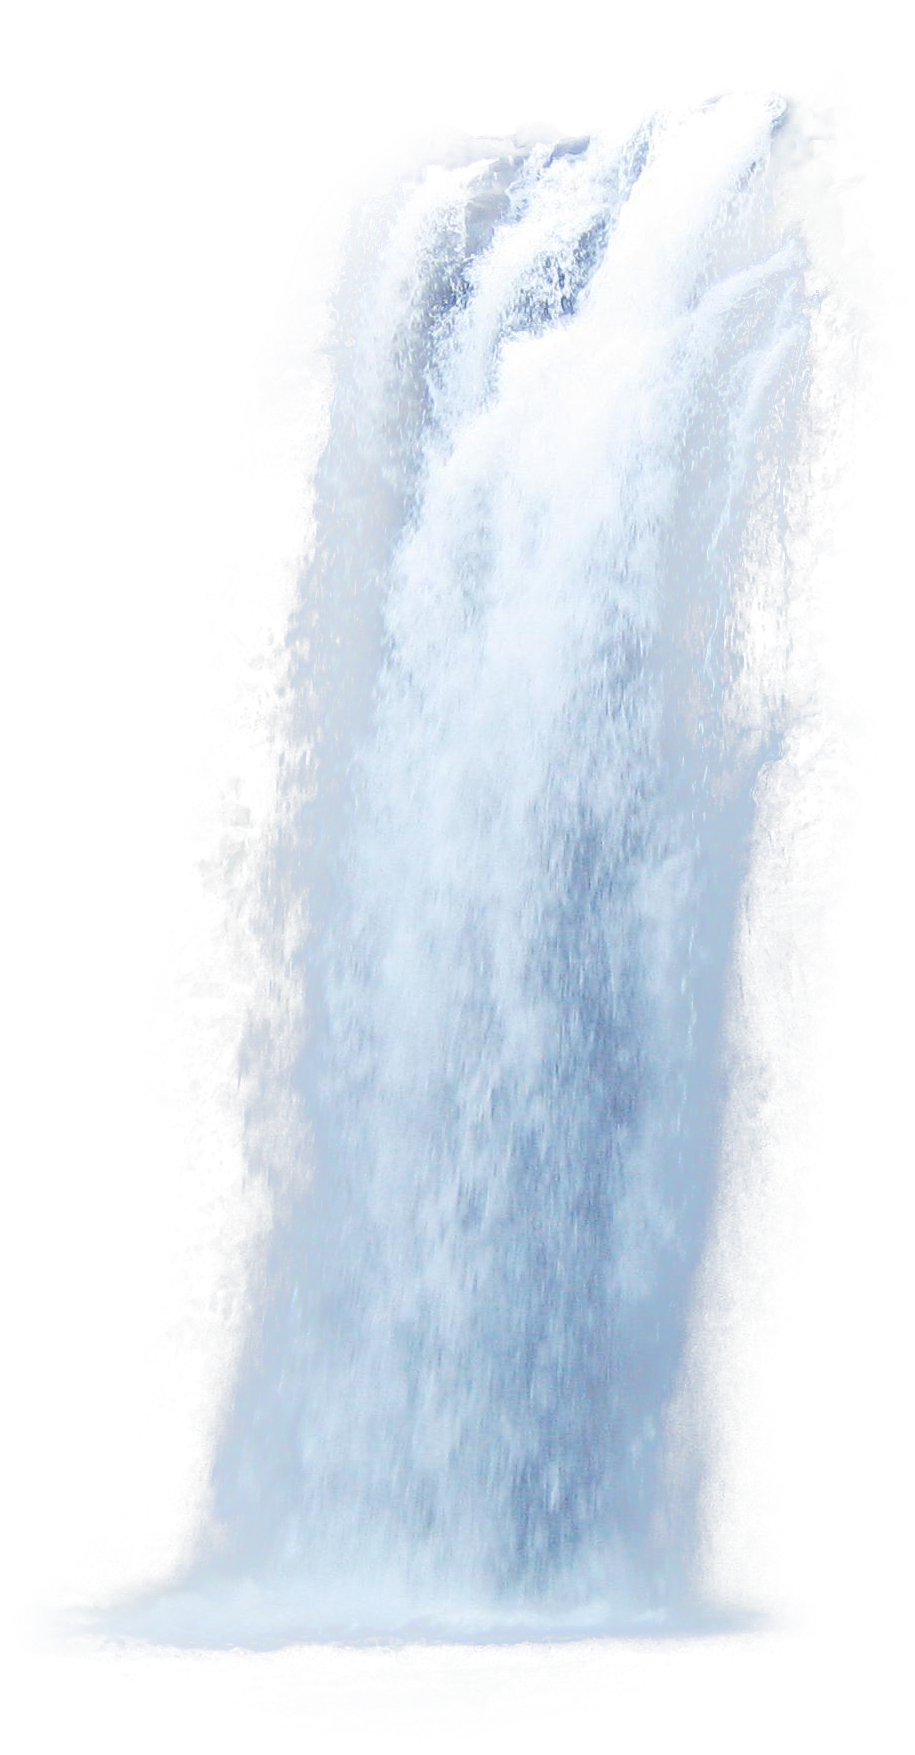 Waterfall PNG HD Transparent Waterfall HD.PNG Images. | PlusPNG